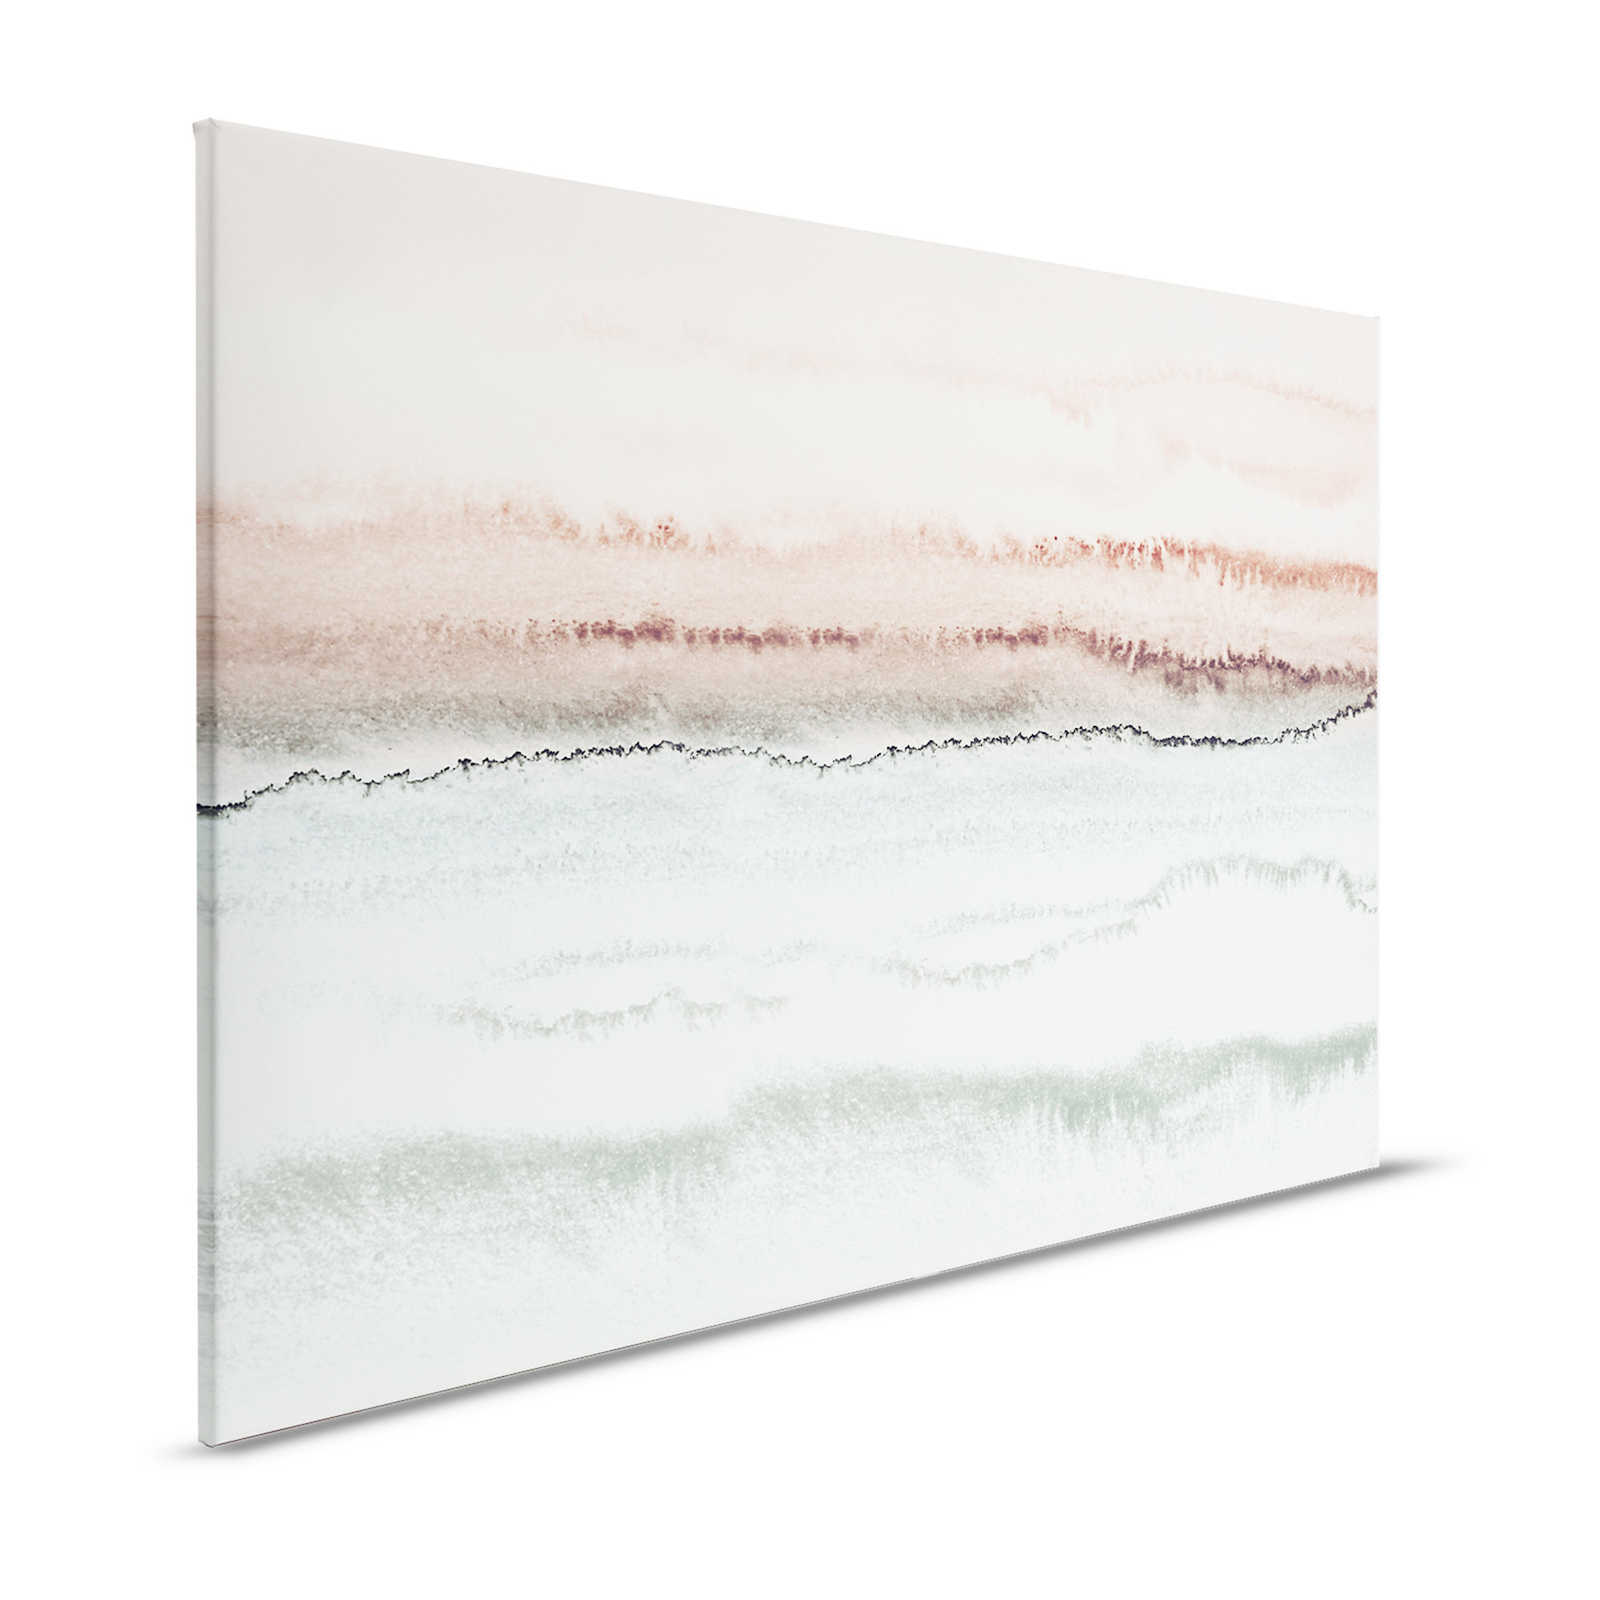 Watercolour Canvas Painting with Abstract Landscape & Gradient - 1.20 m x 0.80 m
